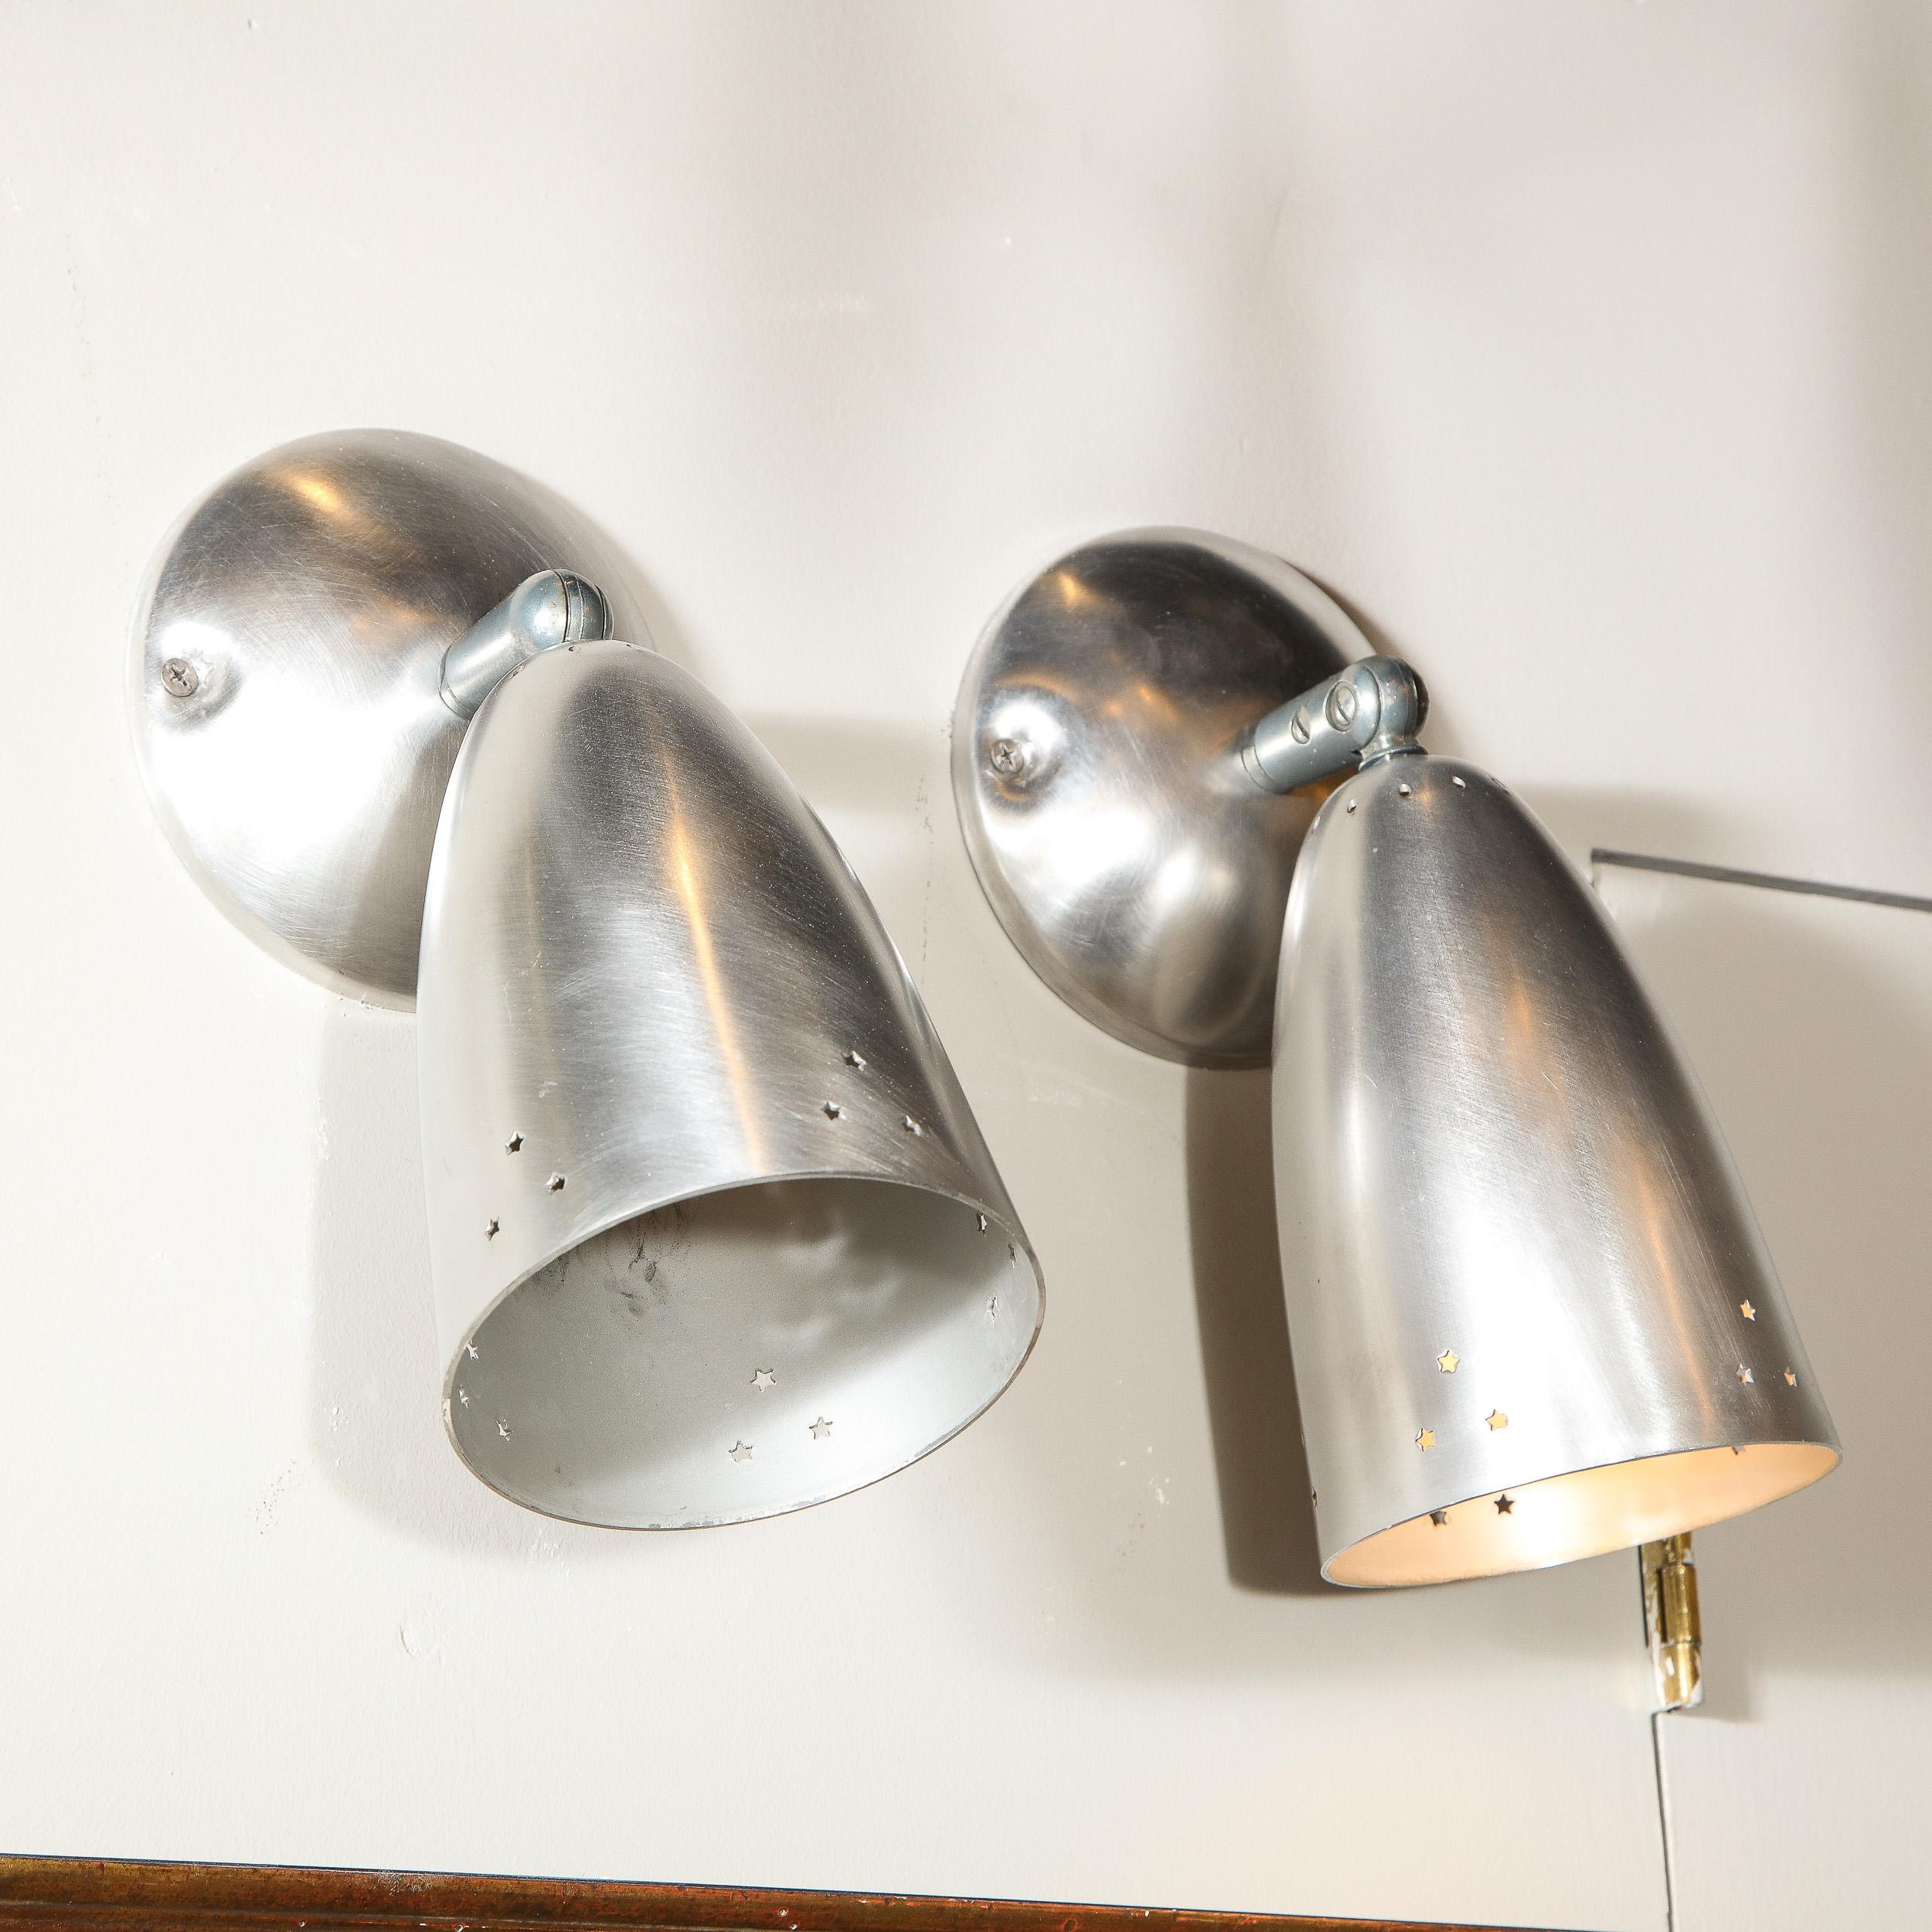 This refined pair of Mid-Century Modern articulating sconces were realized in the United States circa 1960. They feature conical shades that attach to subtly convex circular back plates via cylindrical supports. The shades offer pyramidal trios of